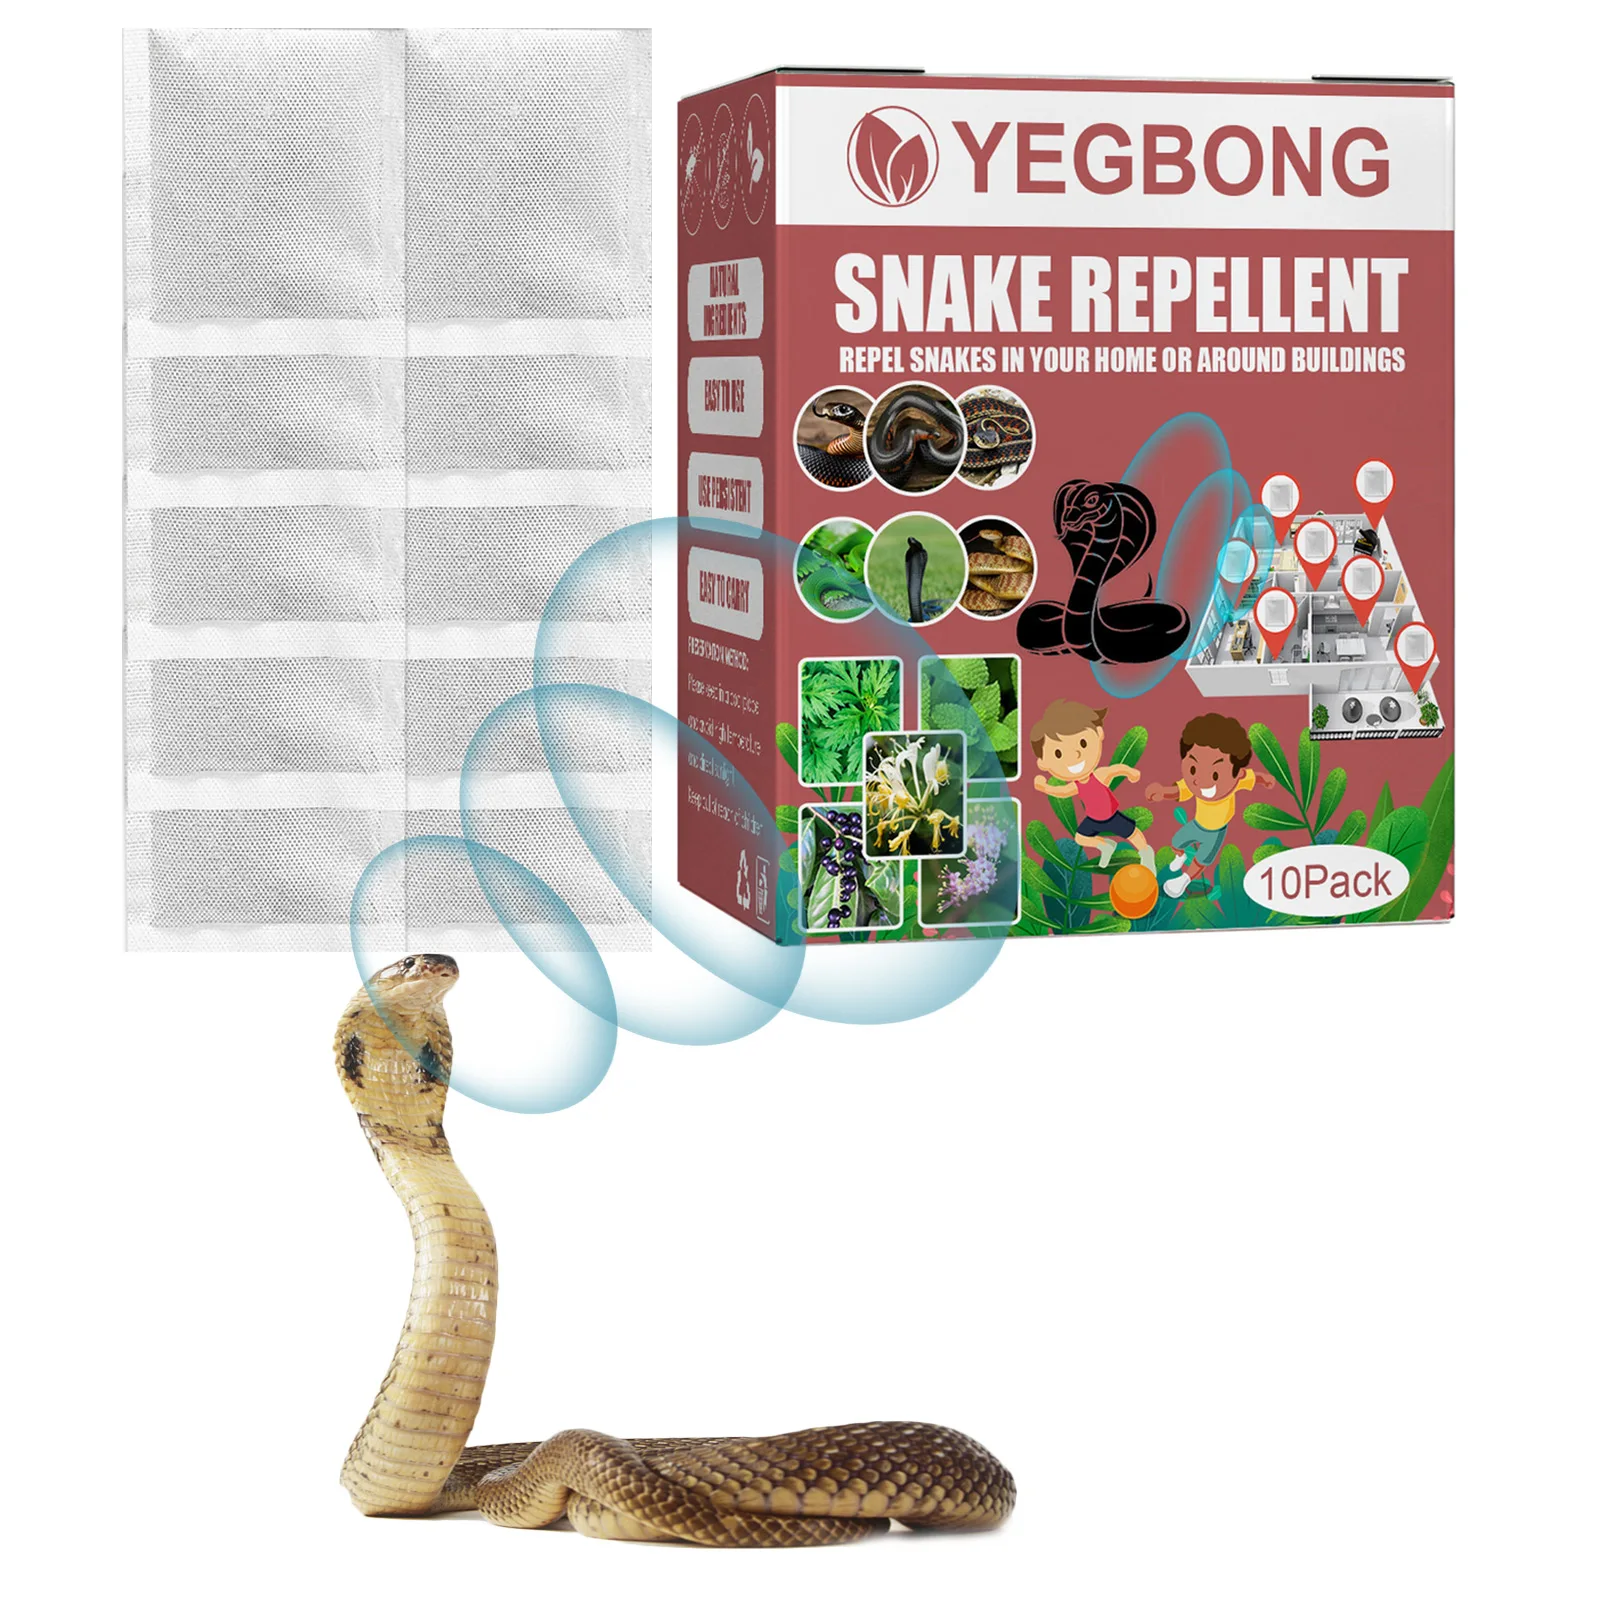 

10pcs Snake Repellents Snake Repelling Bags For Yard Home Attic And More Safe To Use Around Home Children Plants